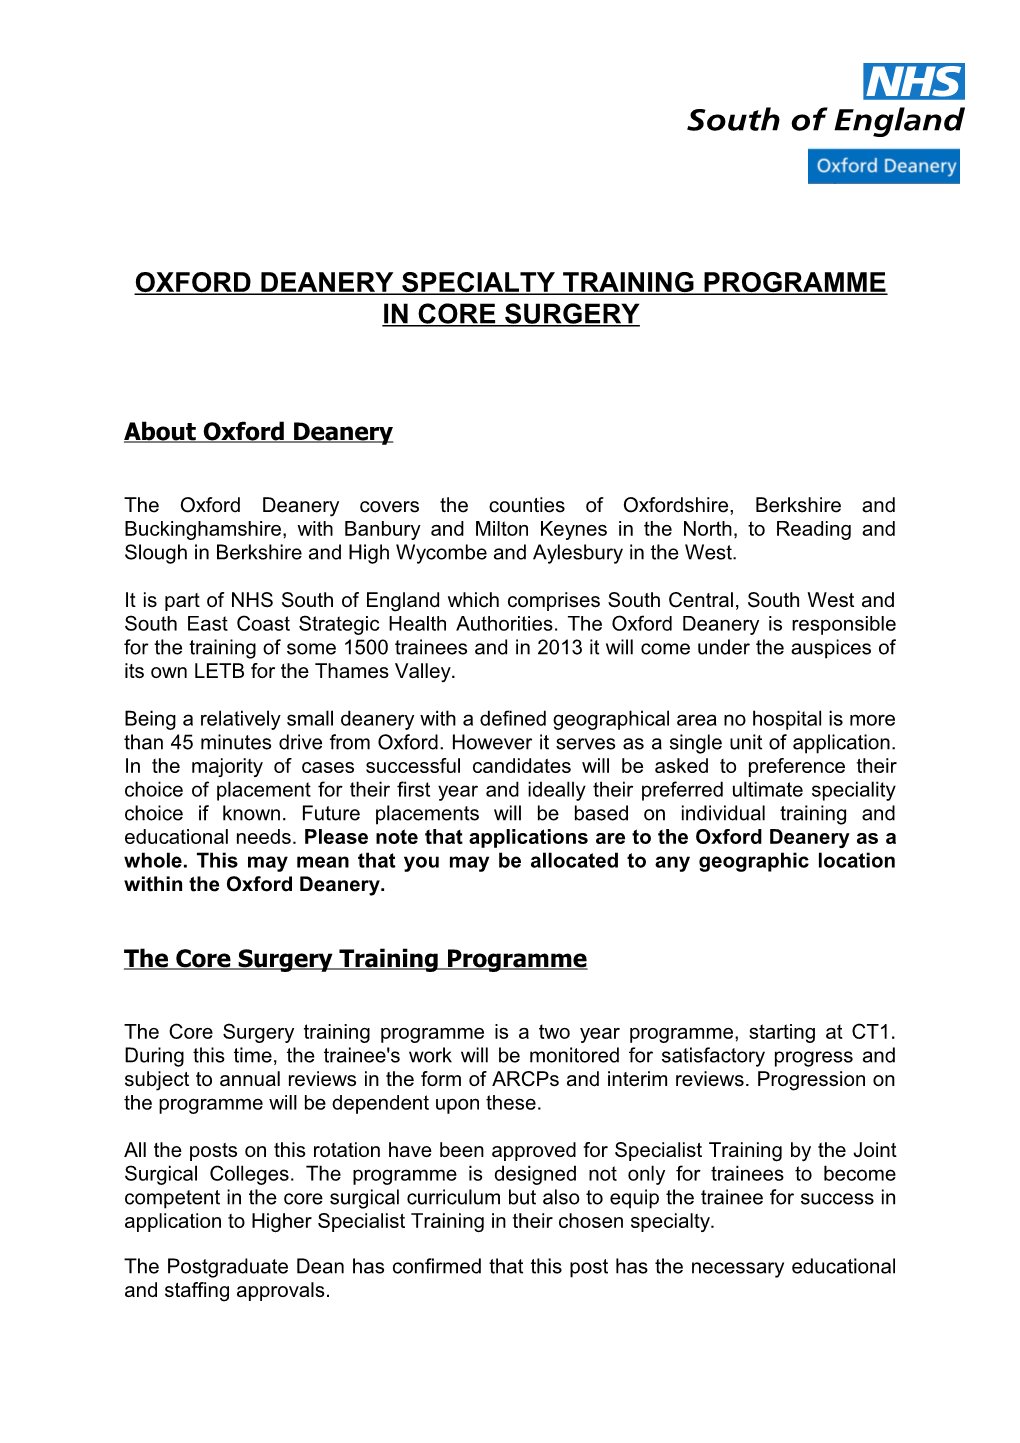 Oxford Deanery Specialty Training Programme in Core Surgery